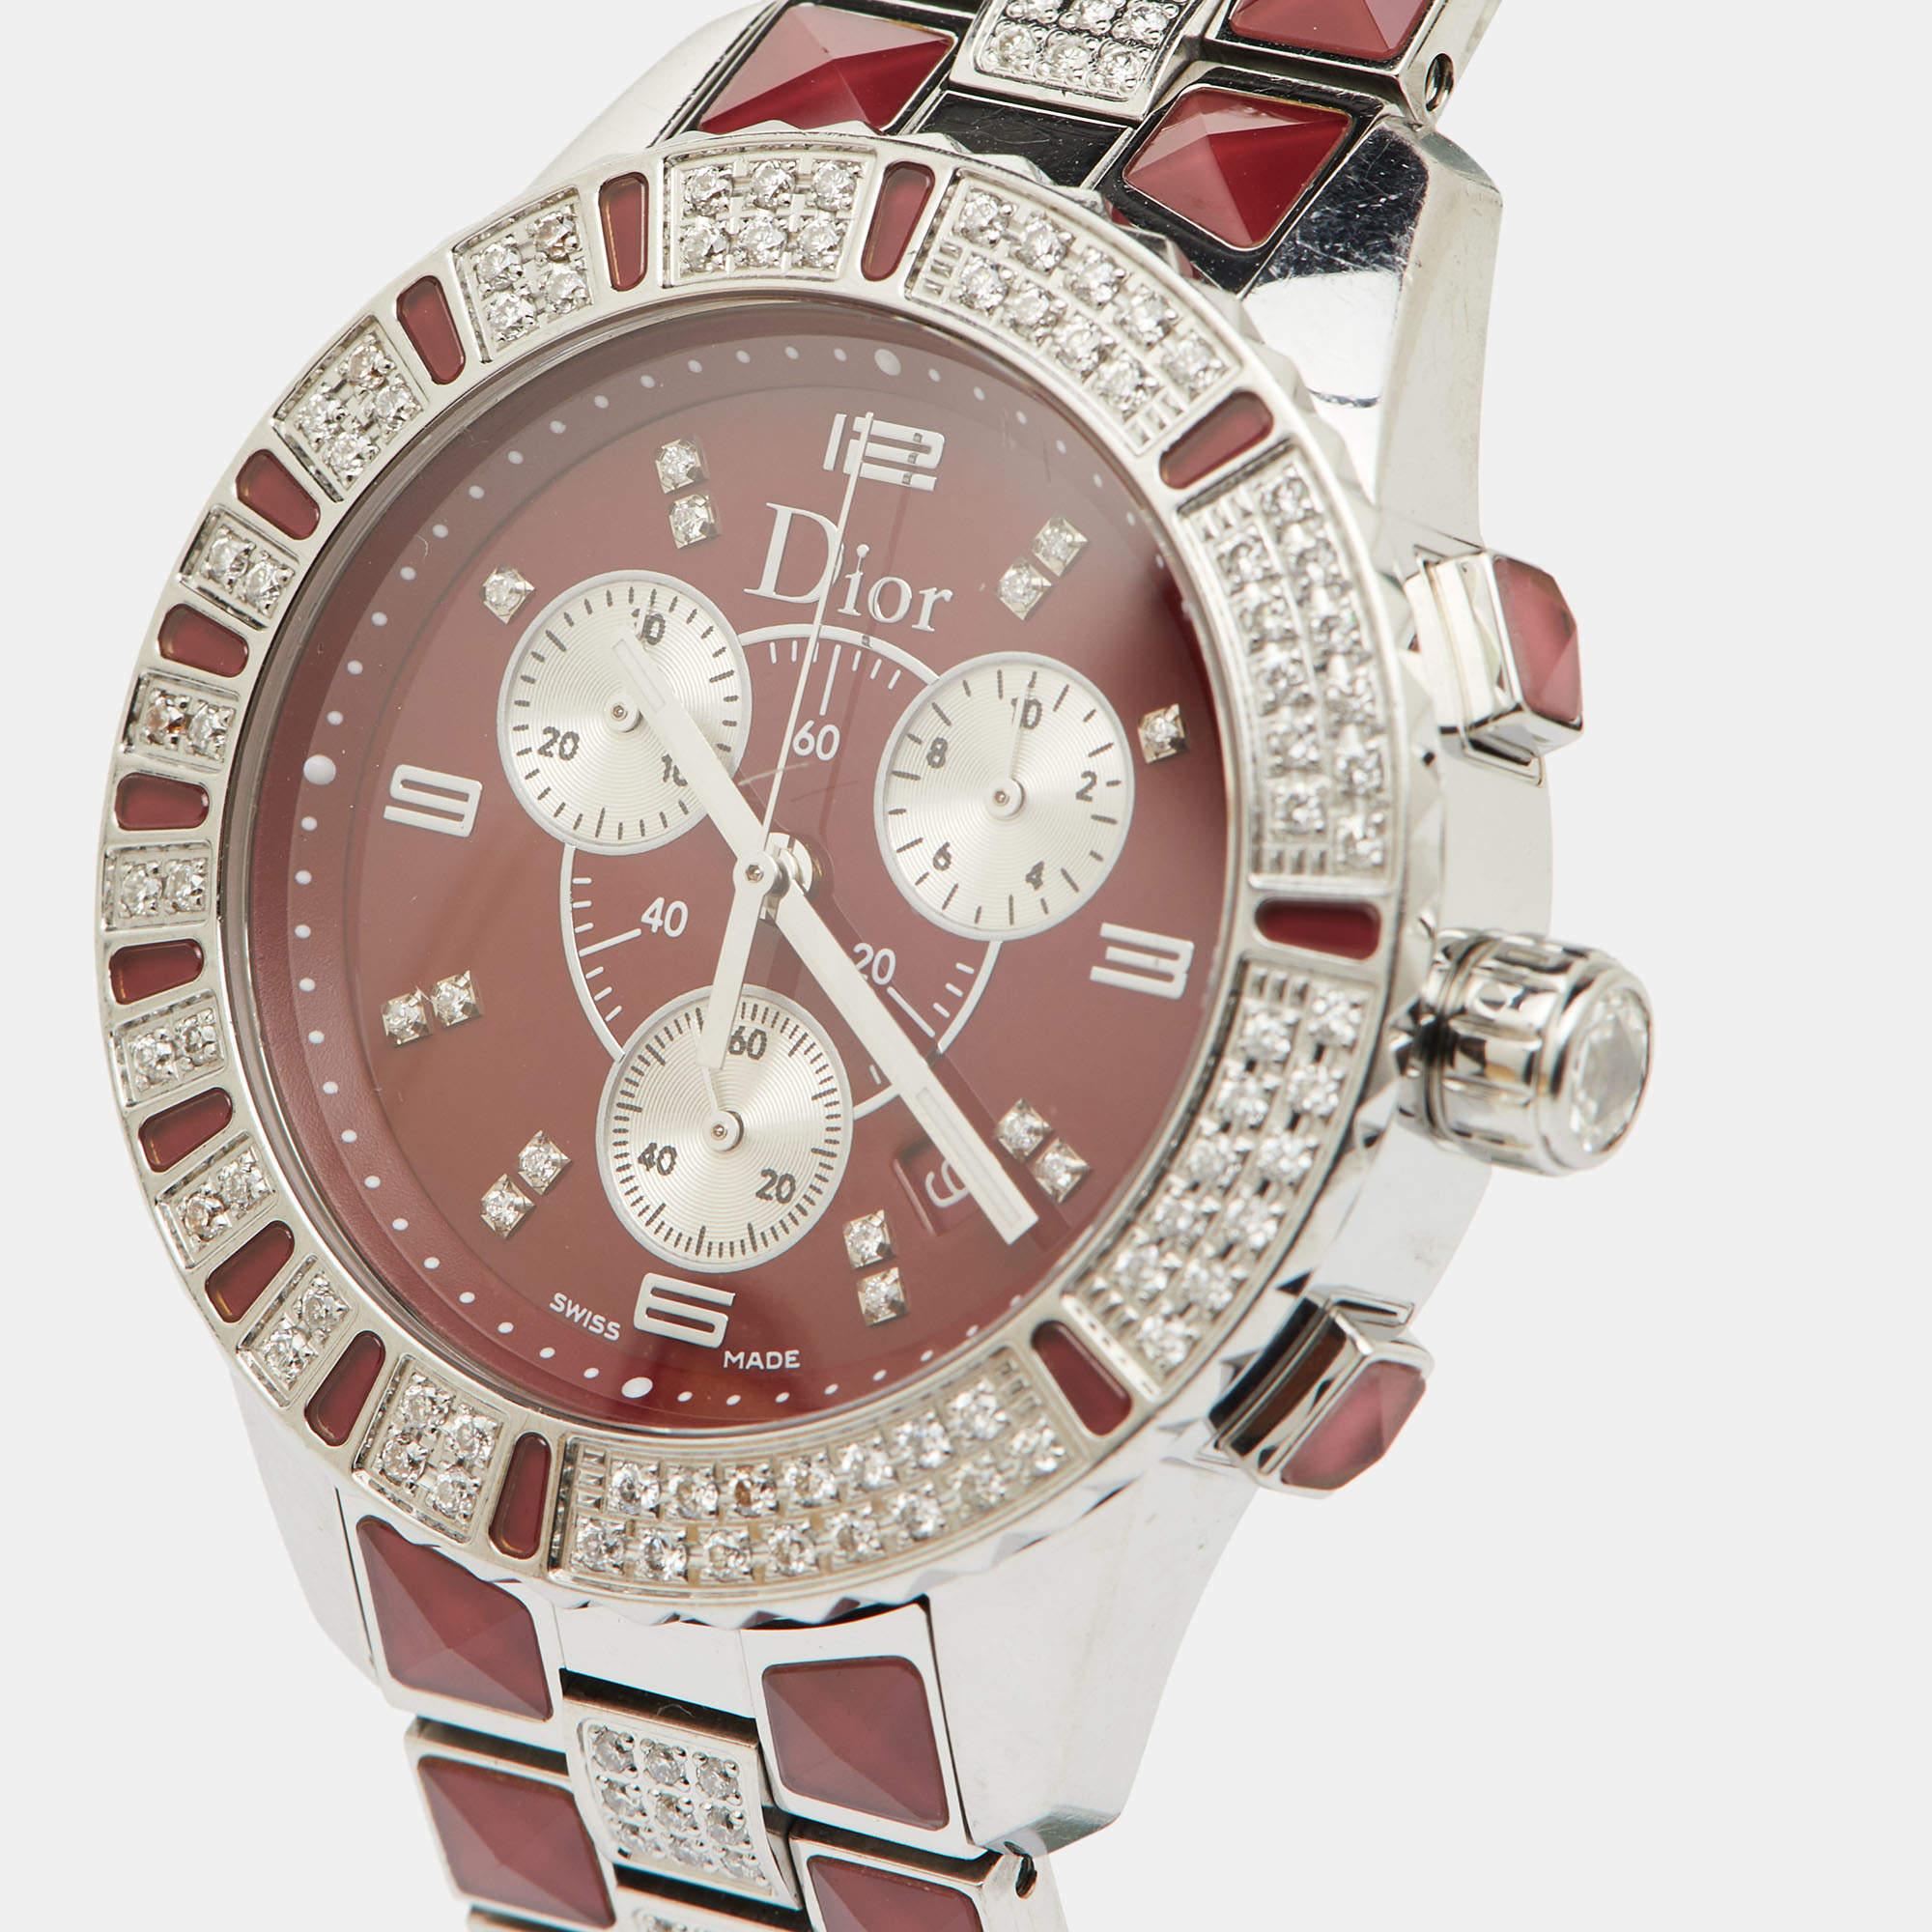 The Dior Christal CD11413FM001 is a striking women's wristwatch. Its vibrant red stainless steel case exudes elegance. The dial features glimmering diamond accents, adding a touch of luxury. This limited edition timepiece seamlessly combines fashion